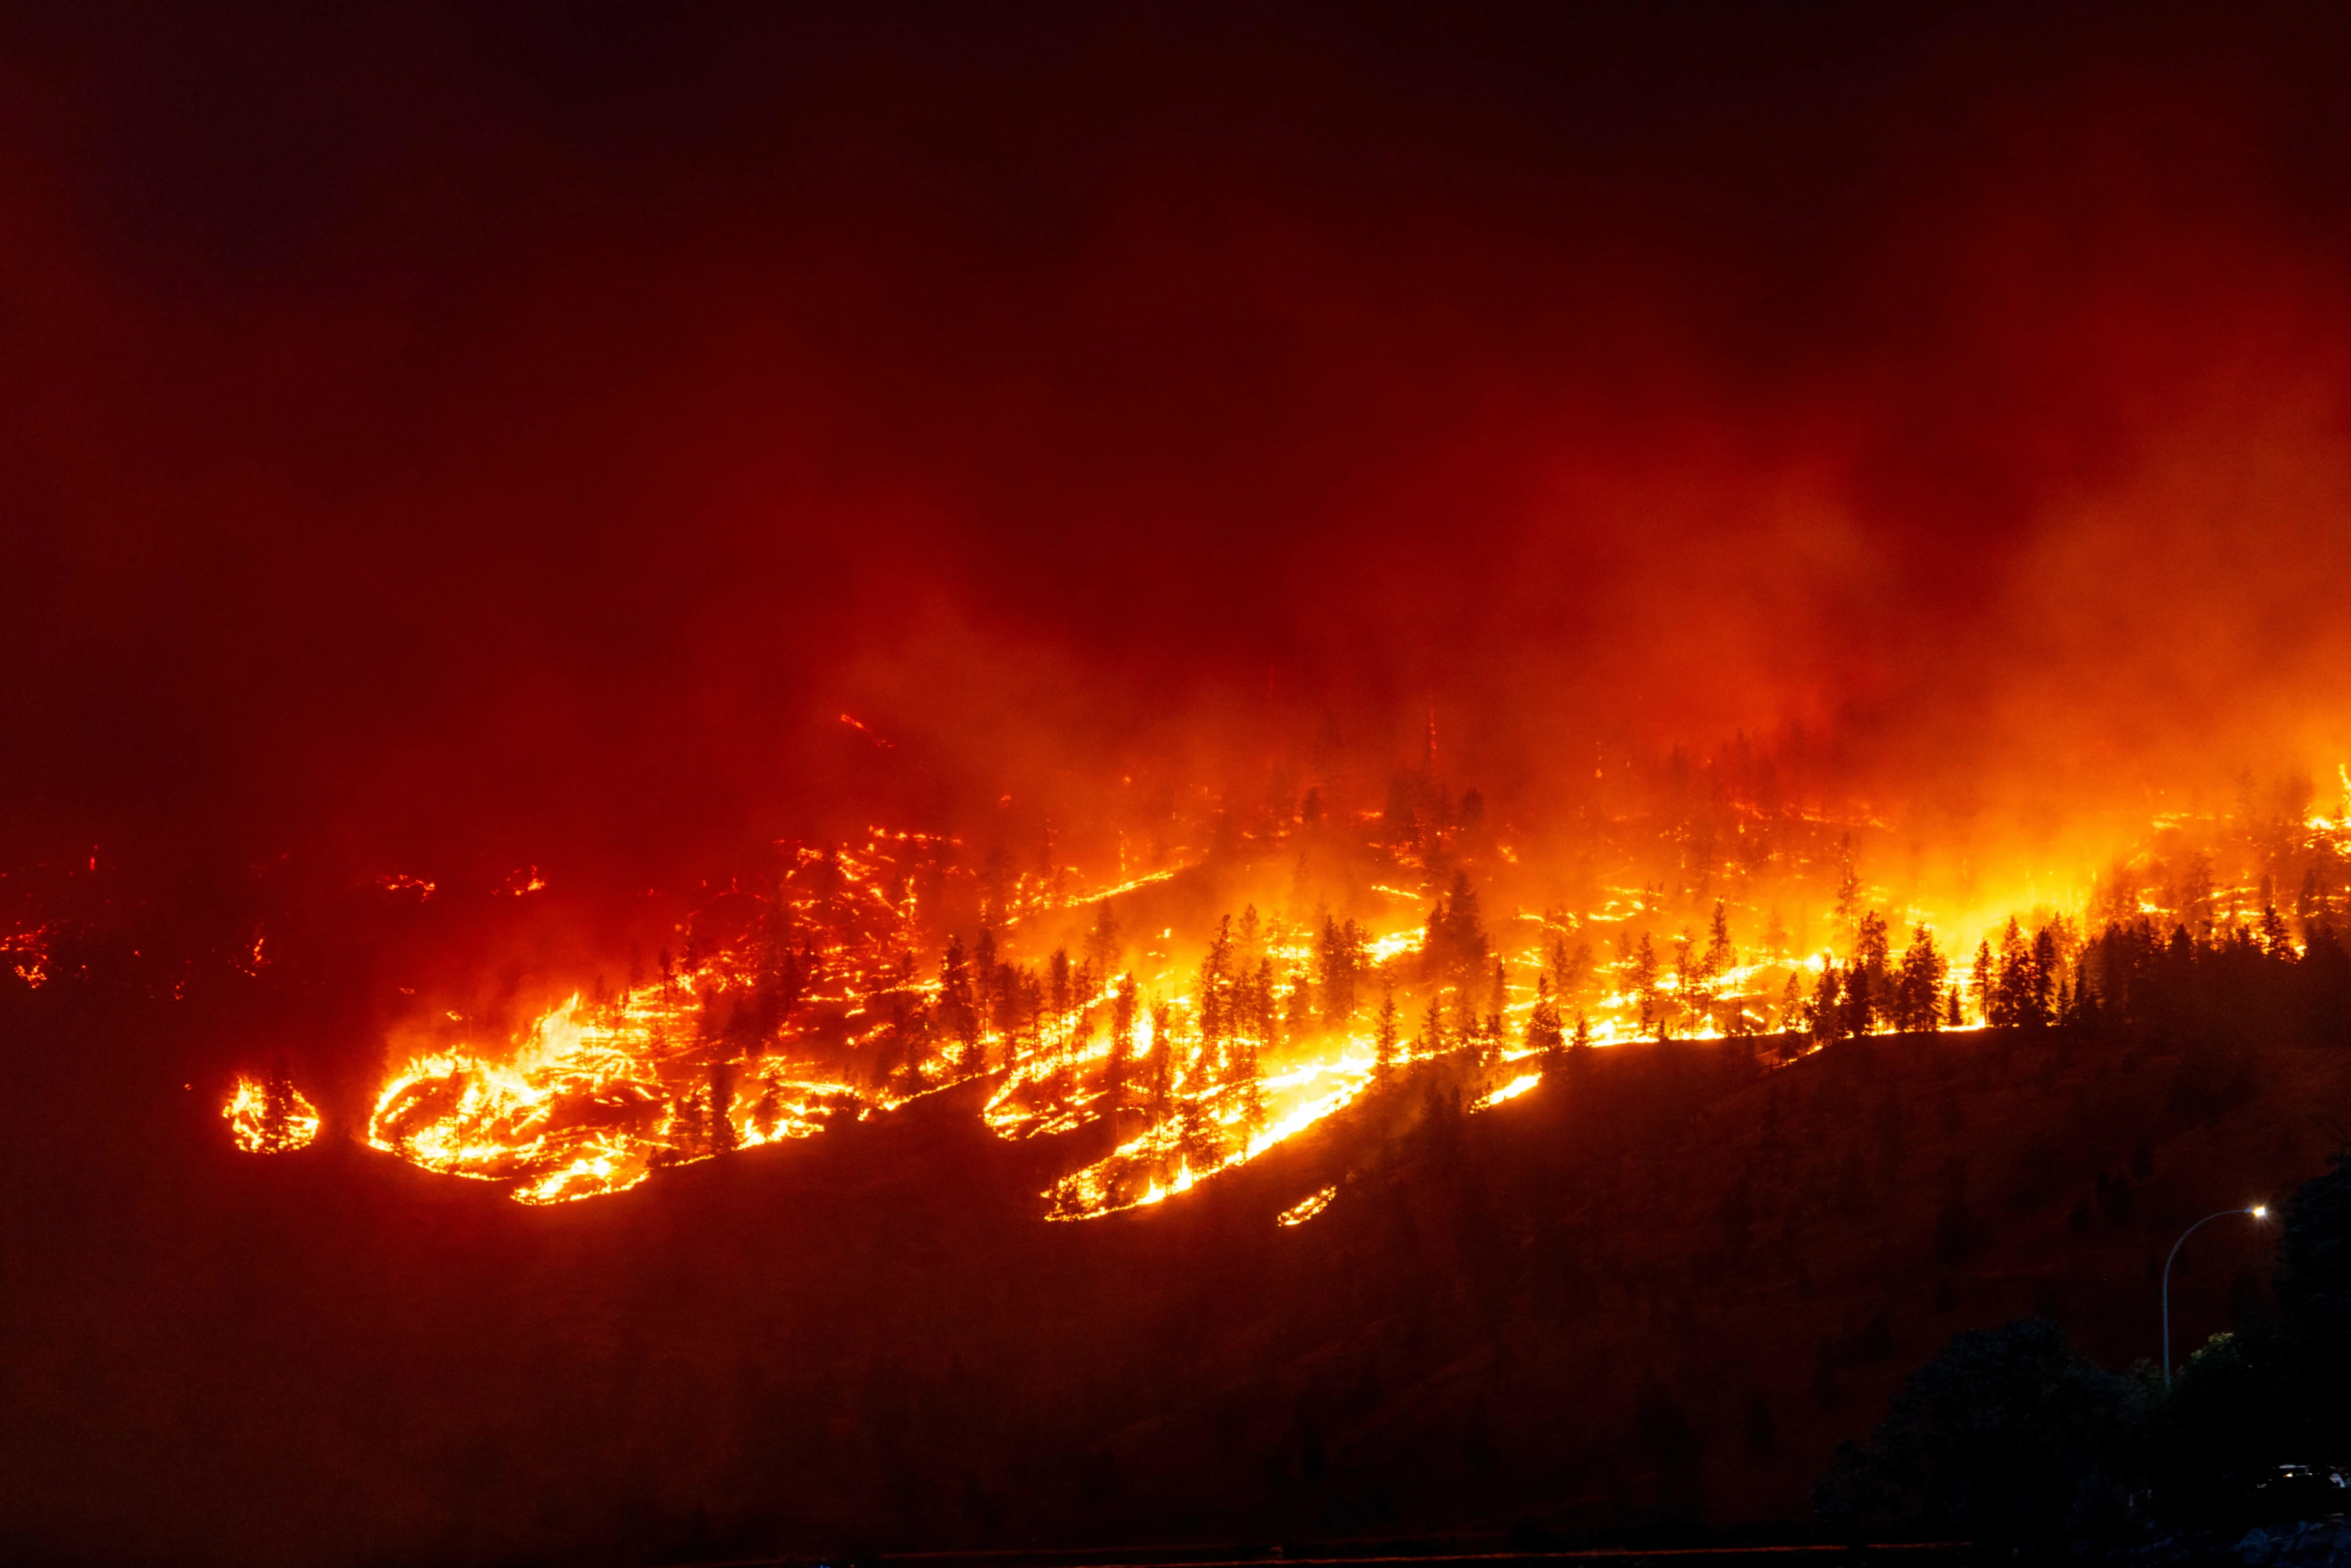 Reasons for wildfires complex but scientists say climate change plays key role